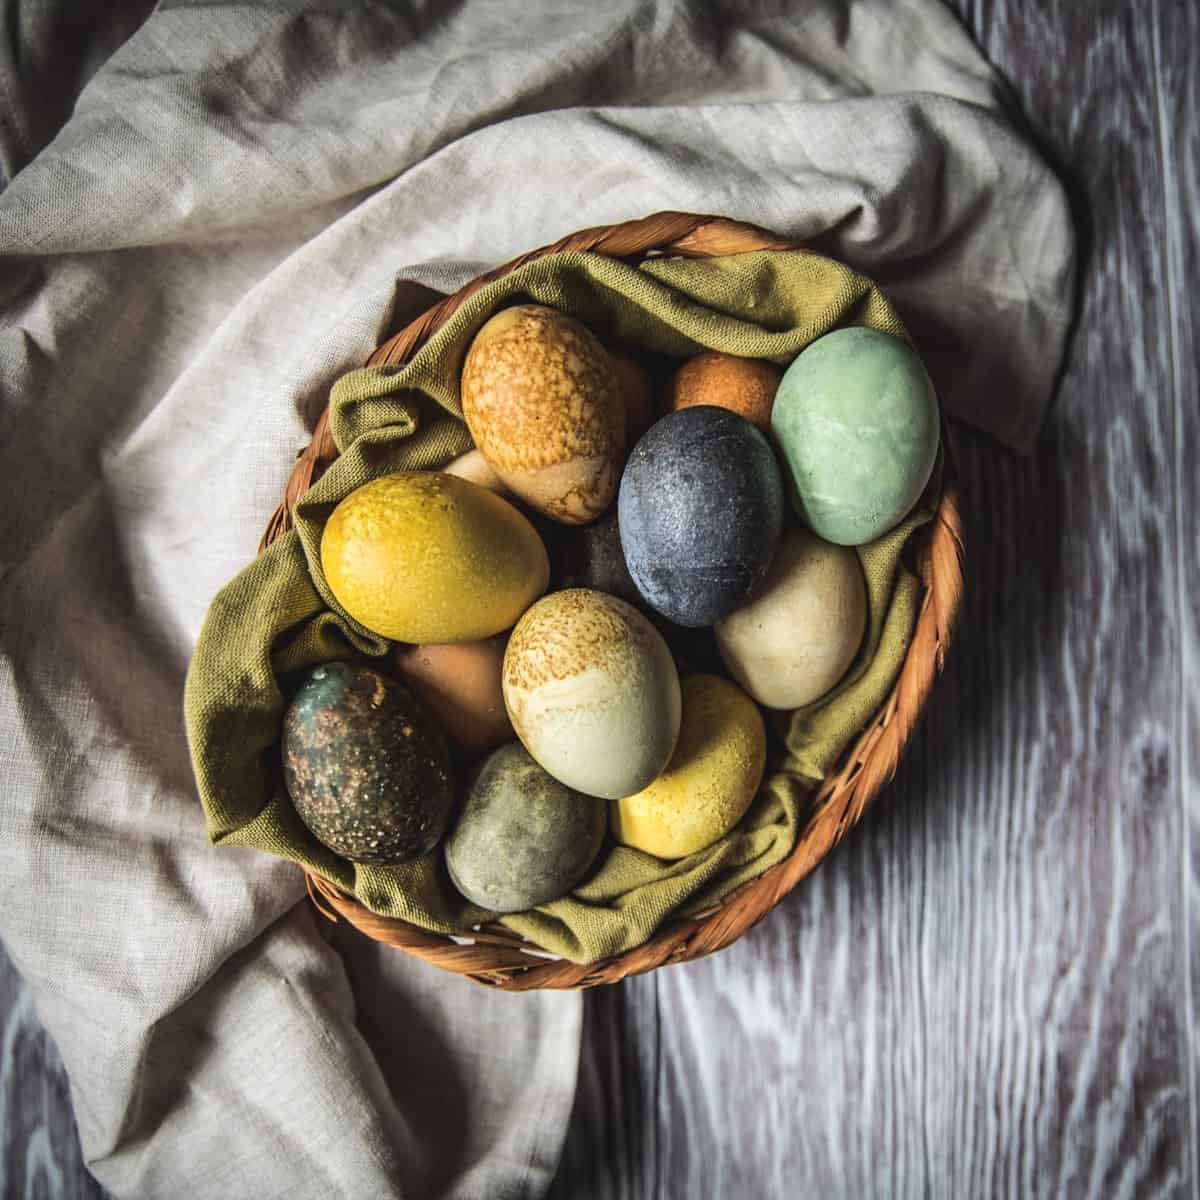 DIY Natural Easter Egg Dye {No food coloring} - The From Scratch